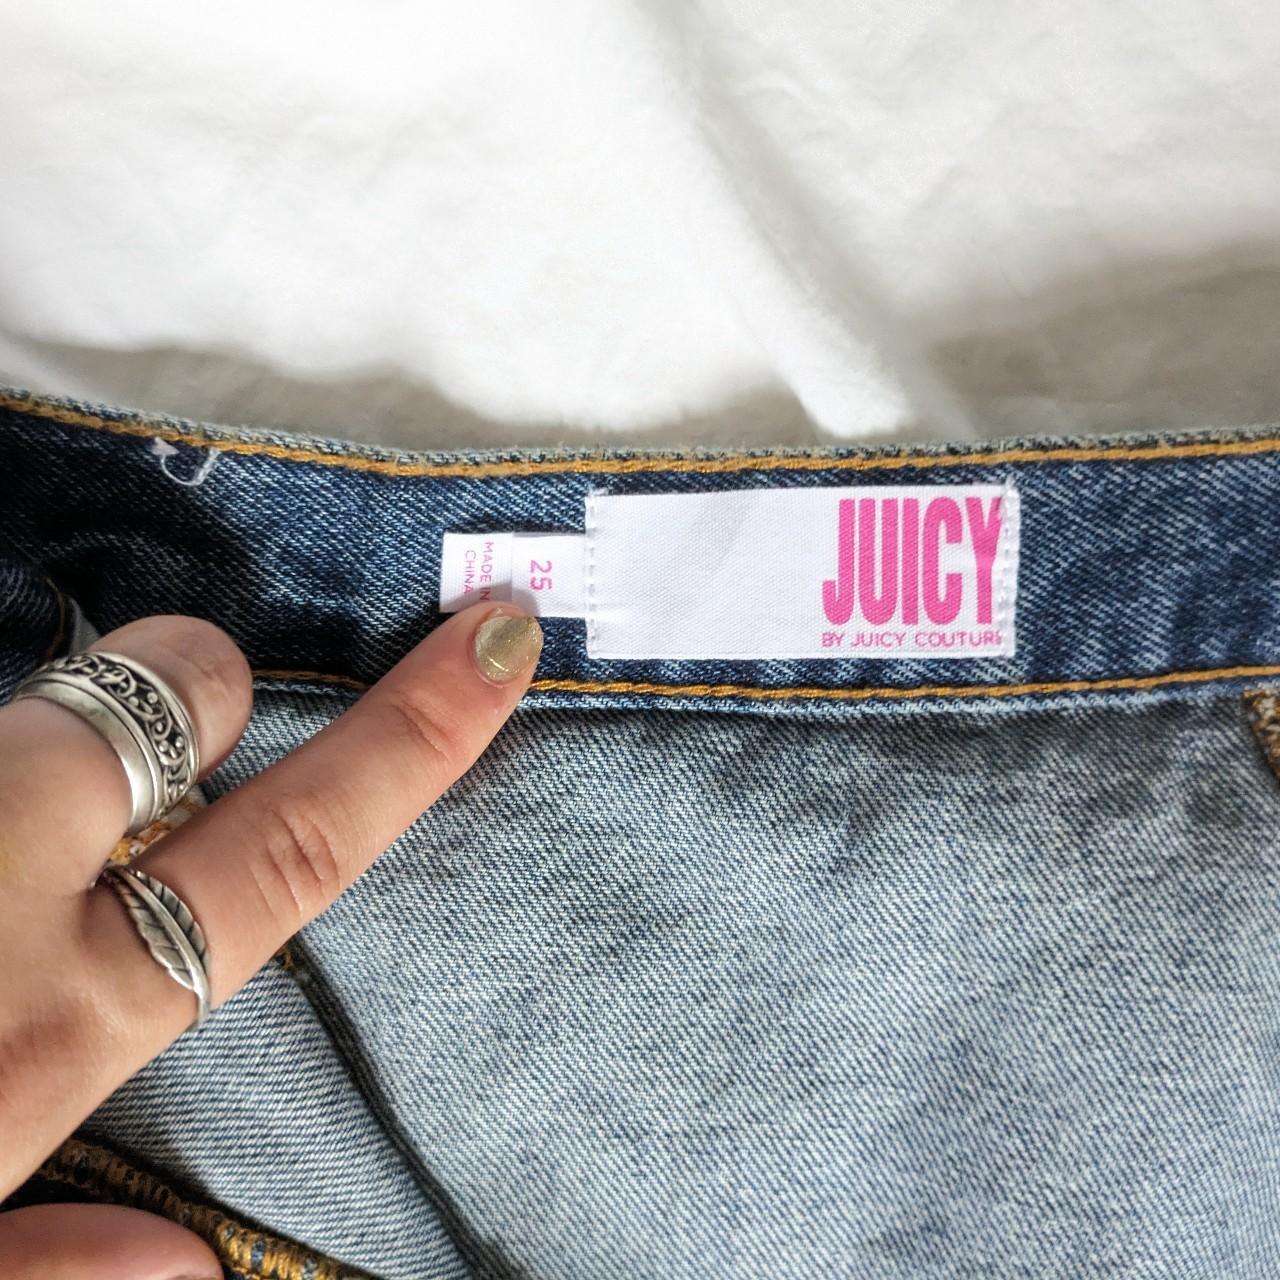 Juicy Couture Long Denim Skirt I bought this so... - Depop